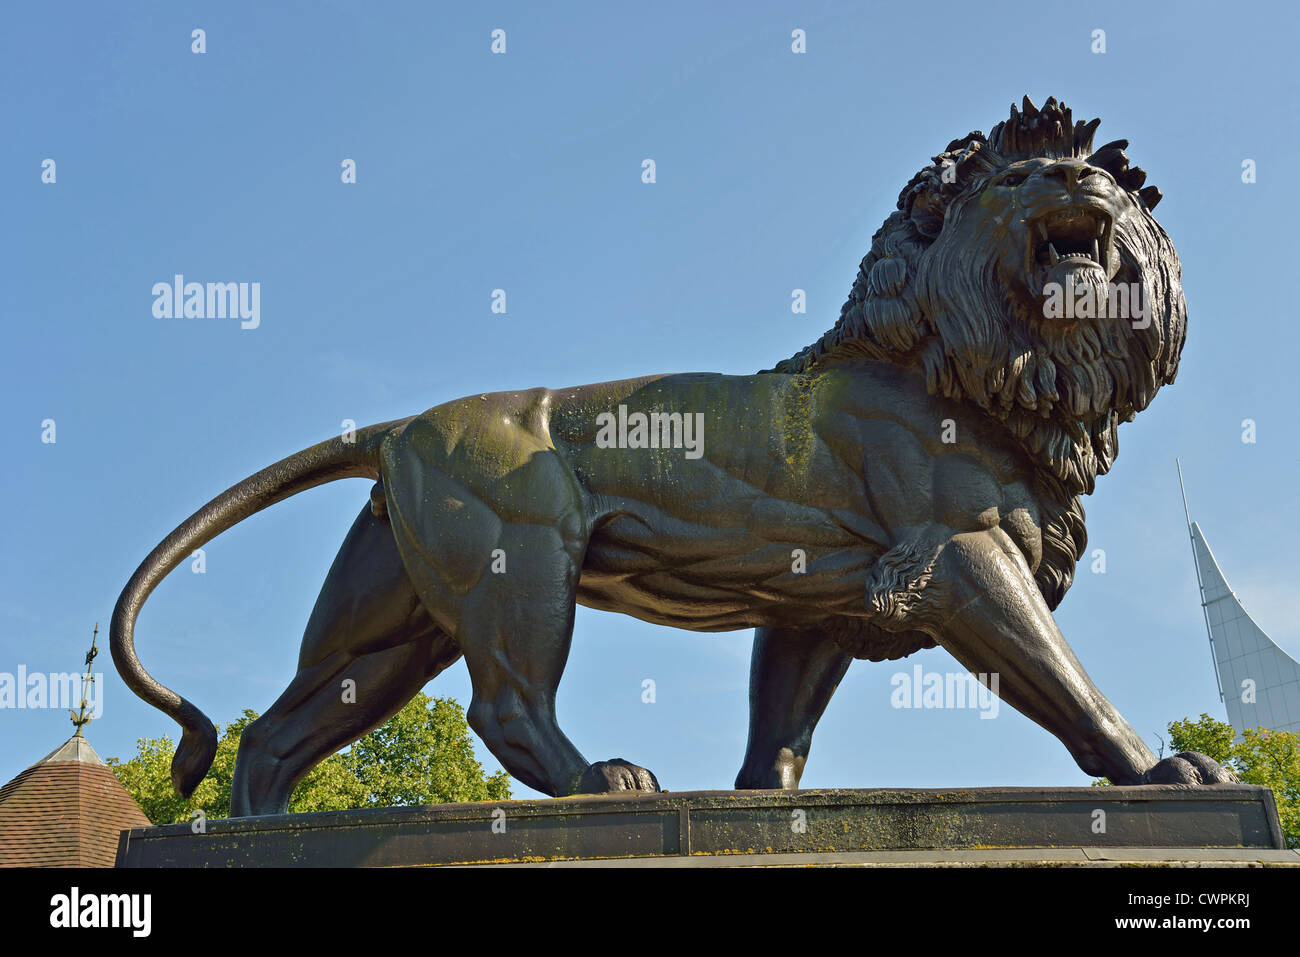 The Maiwand Lion sculpture and war memorial, Forbury Gardens, Reading, Berkshire, England, United Kingdom Stock Photo